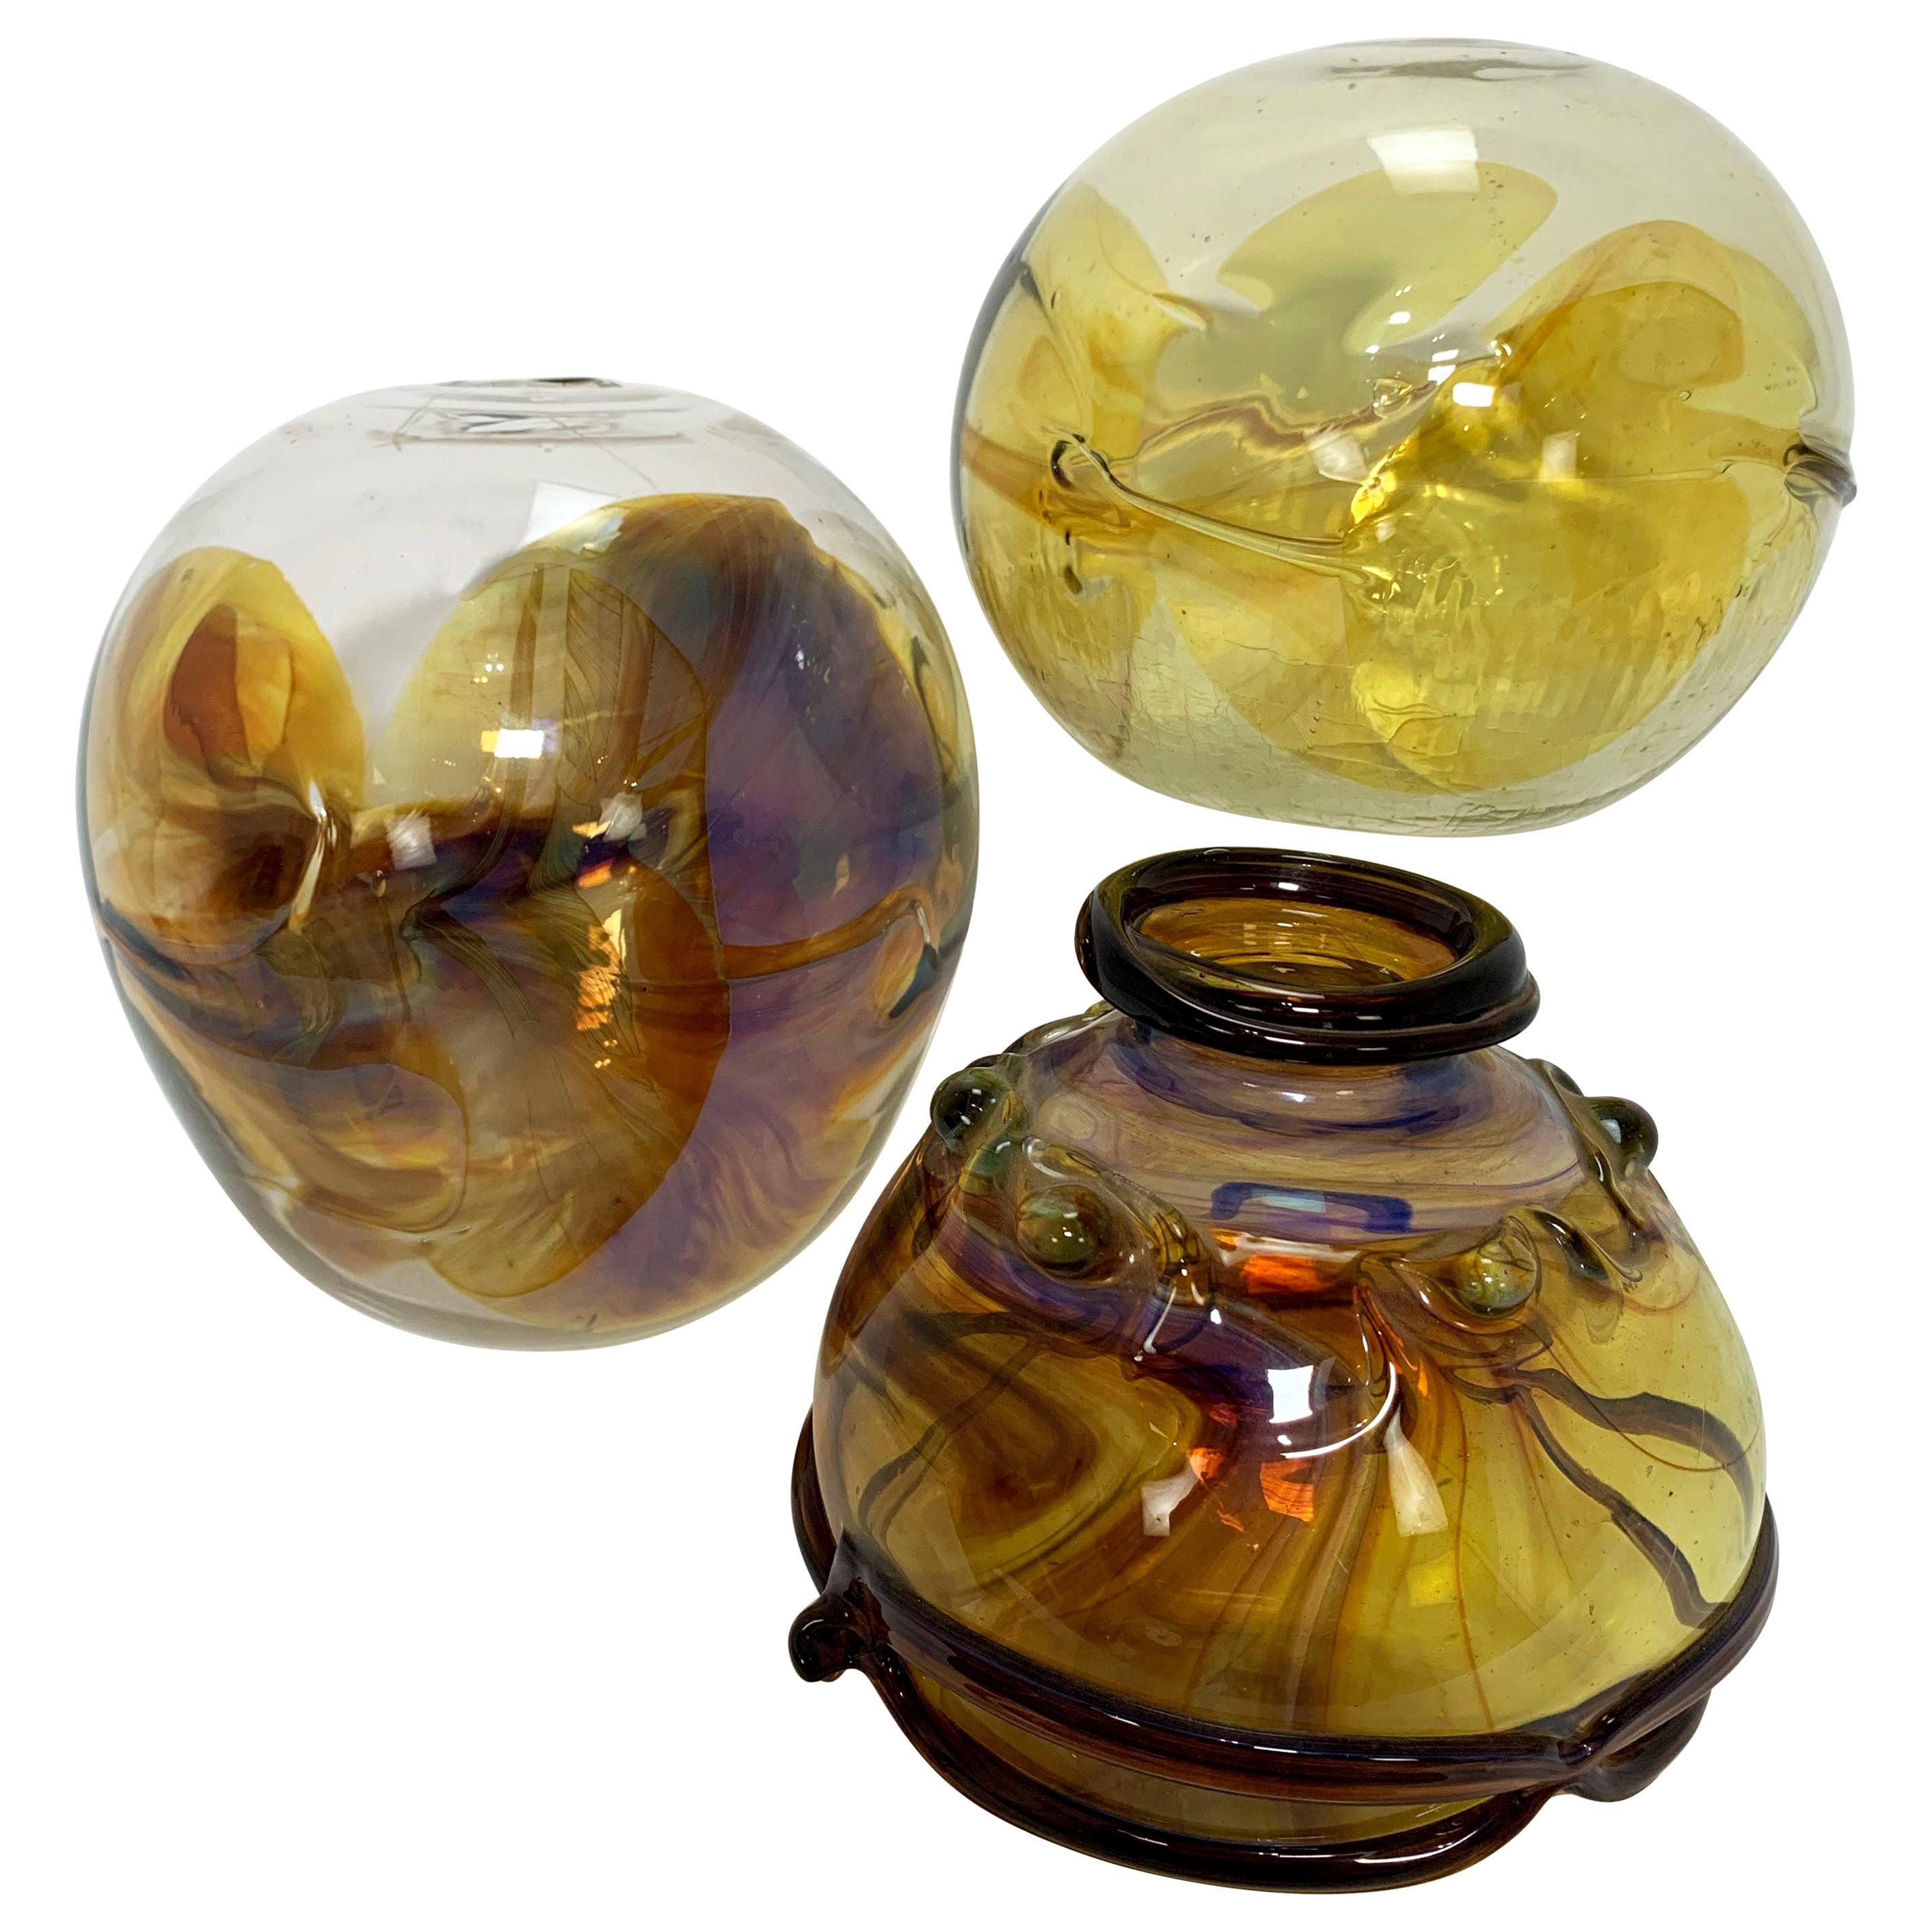 Collection of Three Peter Bramhall Hand Blown Glass Art Sculpture Orb Vases